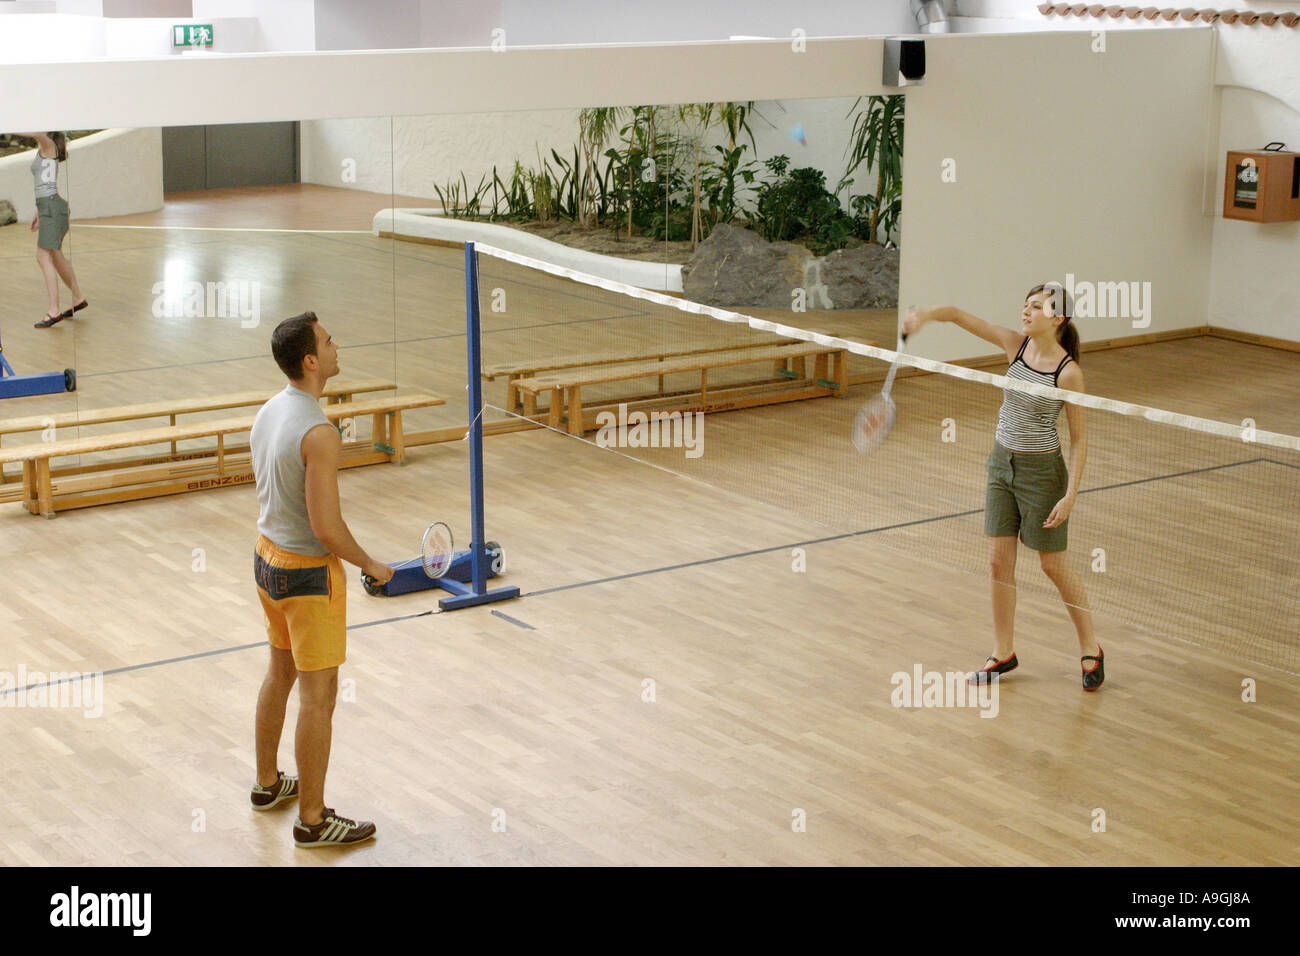 couple playing badminton in a badminton hall. Stock Photo